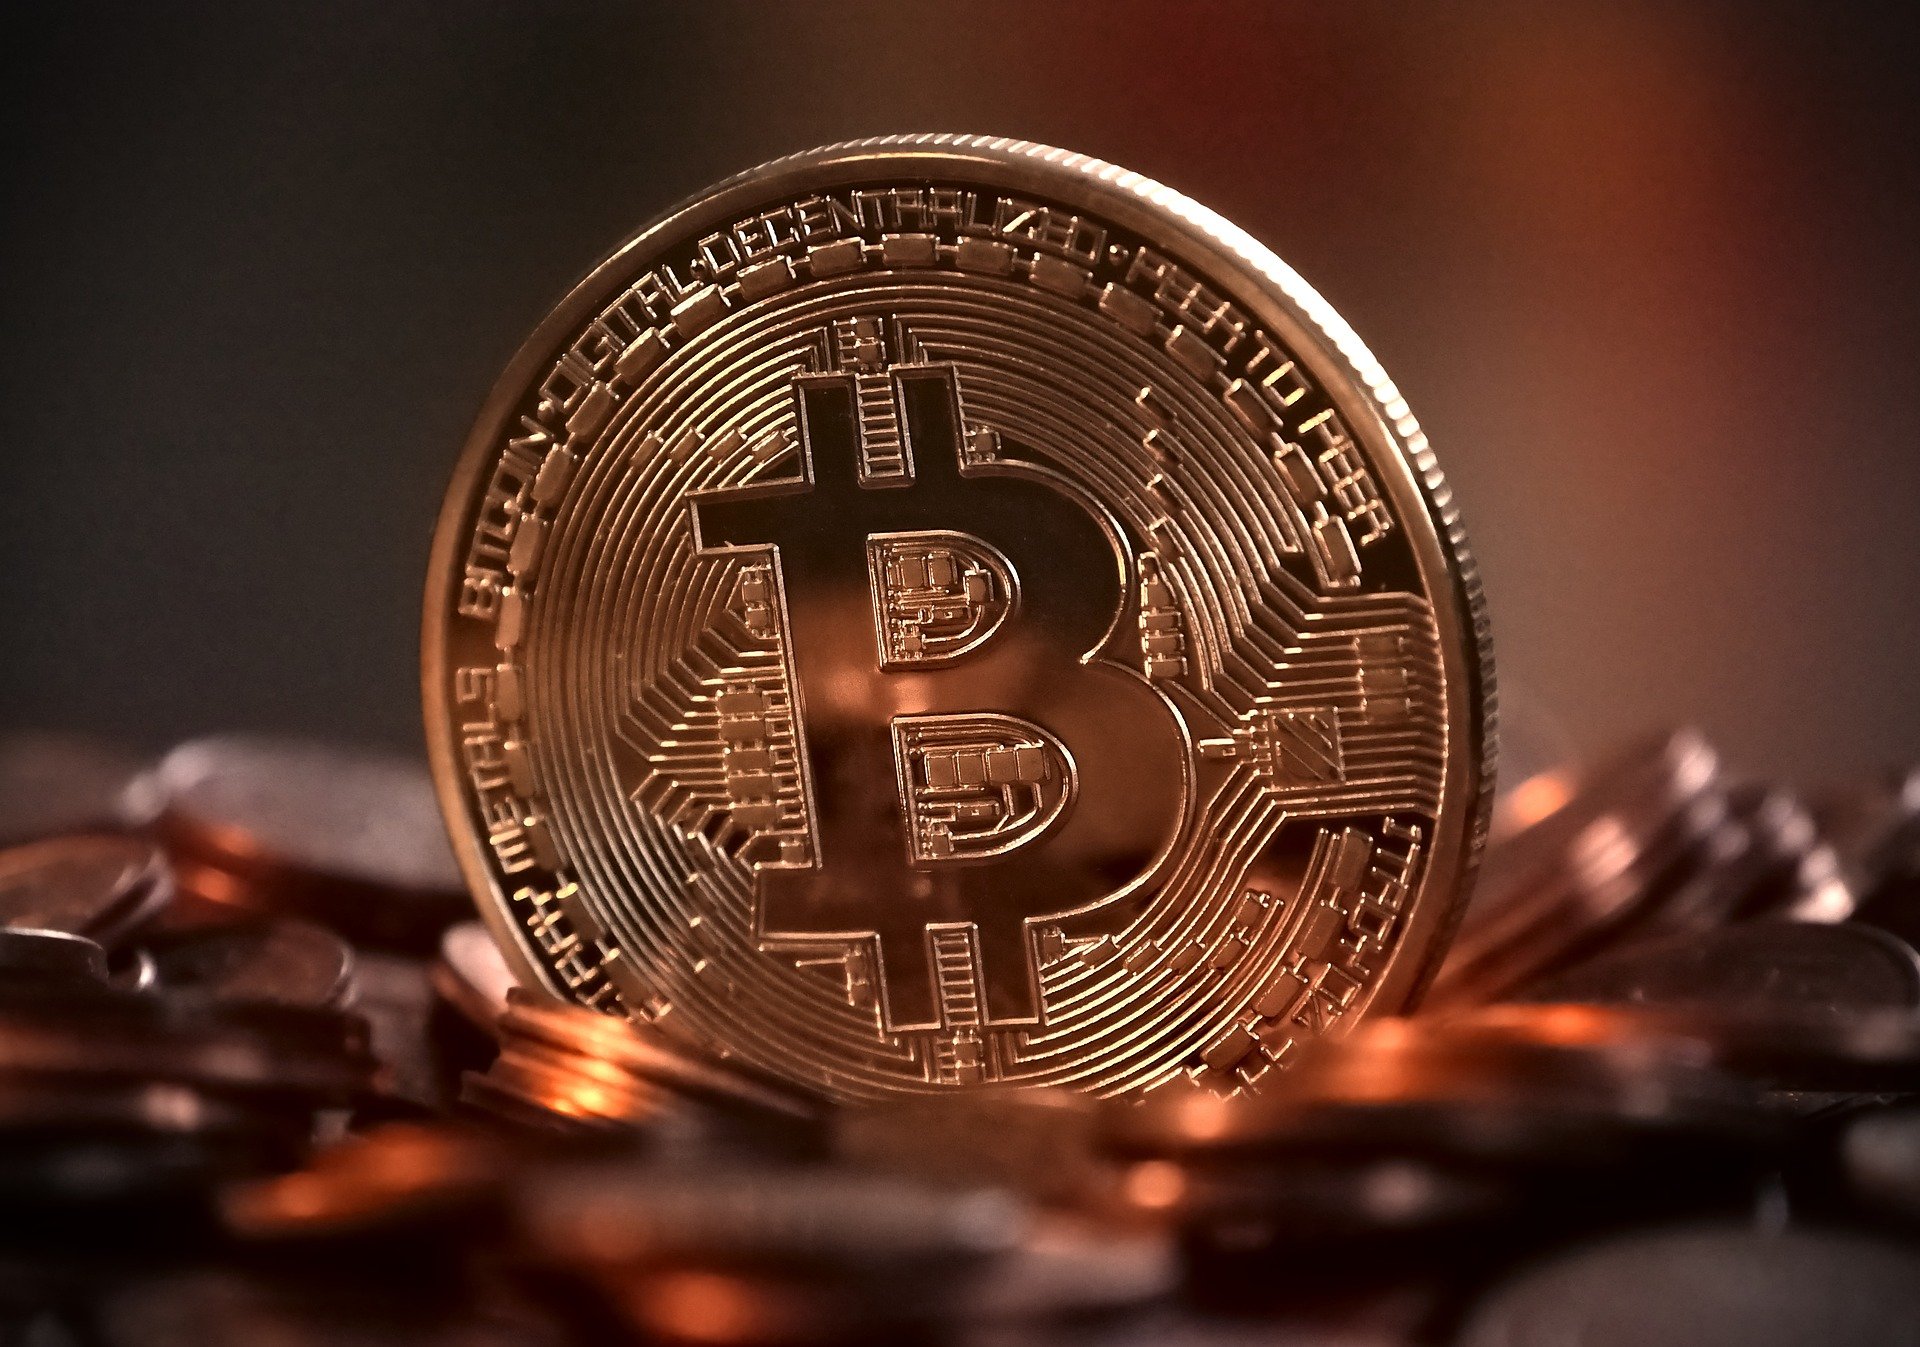 What’s Behind The Popularity Of Bitcoin?